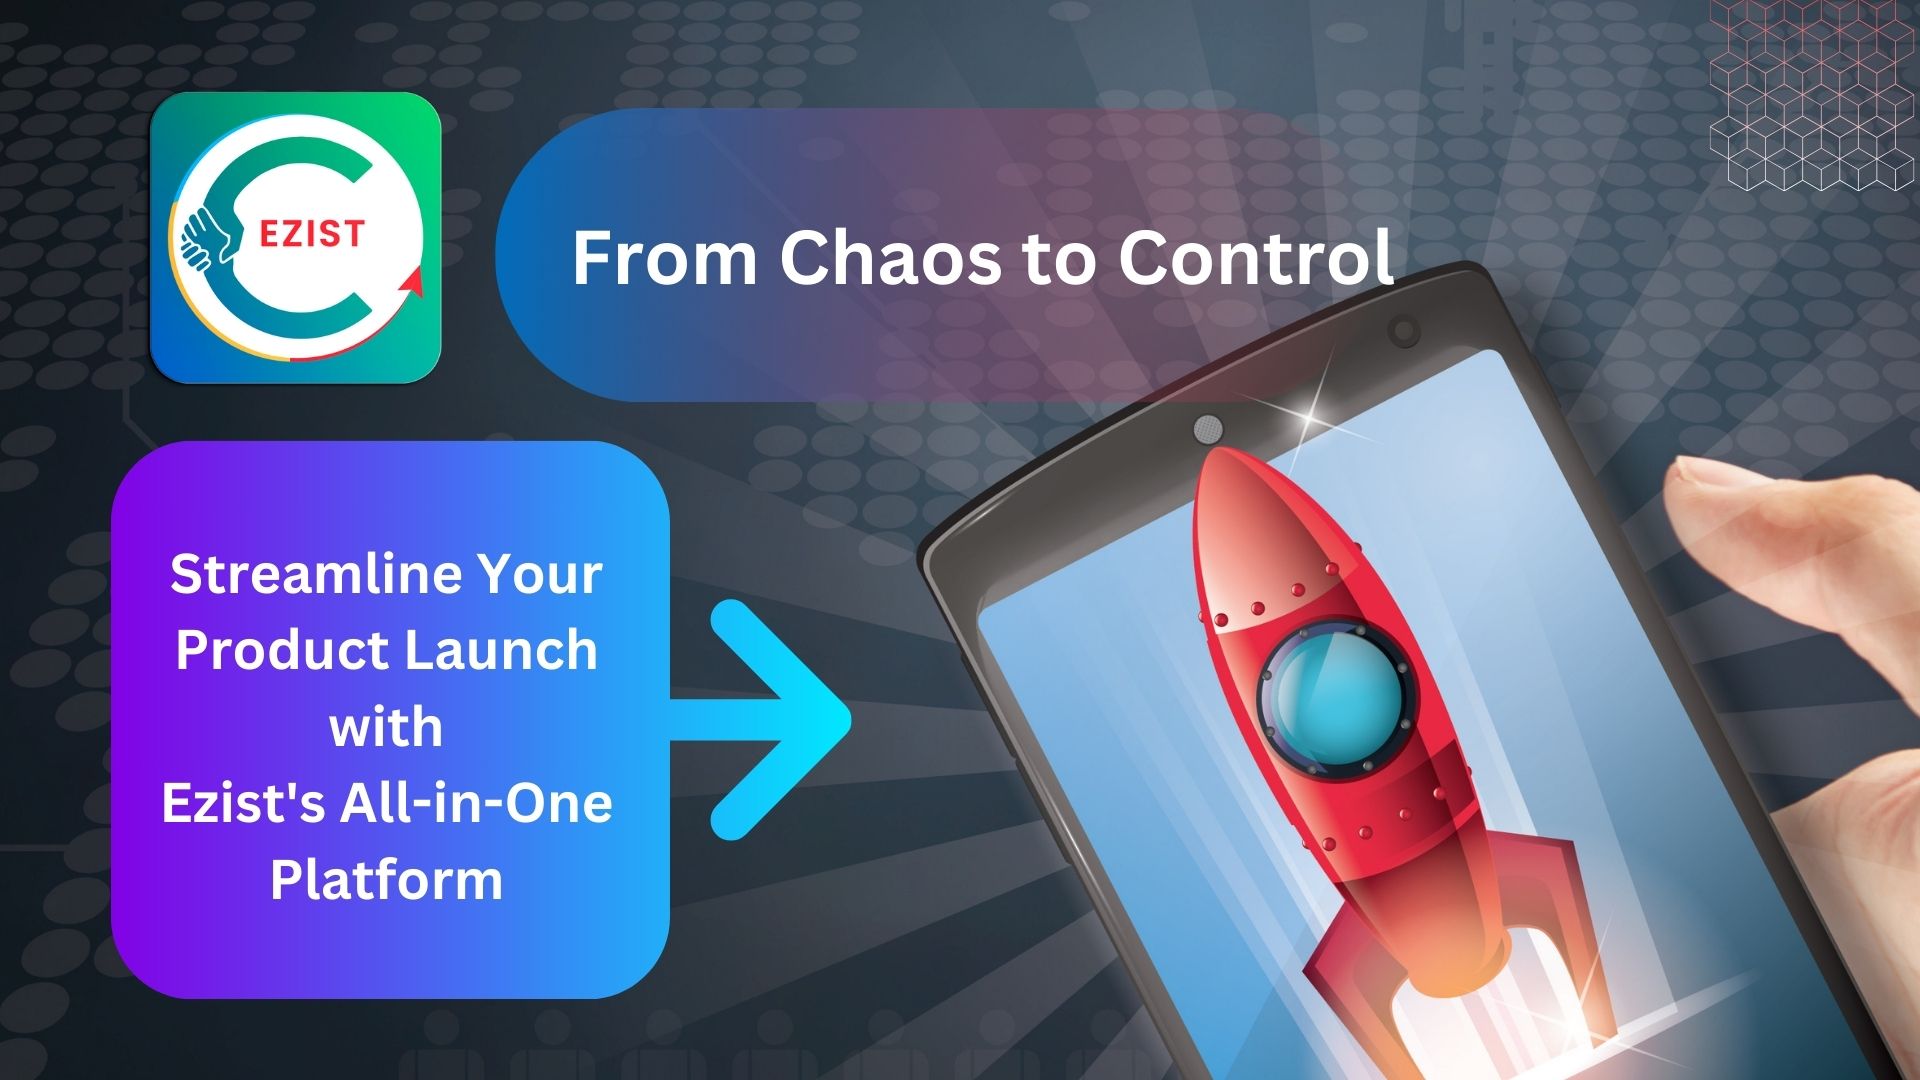 Streamline Your Product Launch with Ezist's All-in-One Platform